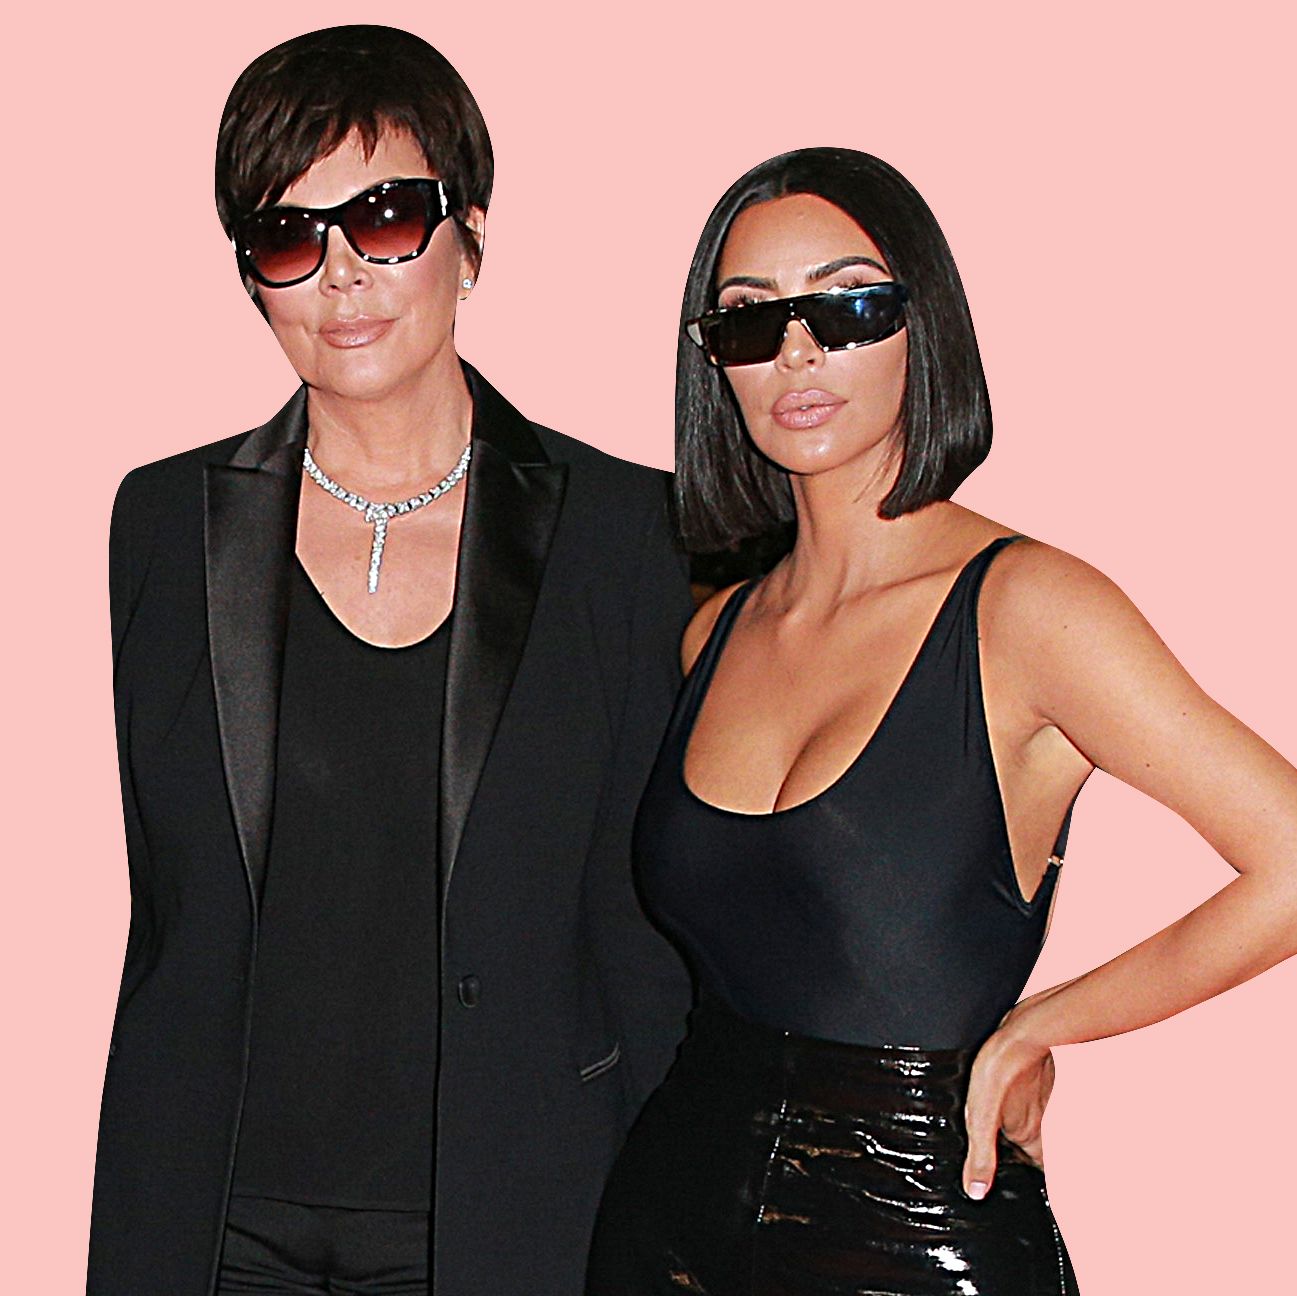 Kardashian Fans Shocked As Kris Jenner Snubs Kourtney And Fans The Flame Of Sibling Rivalry With